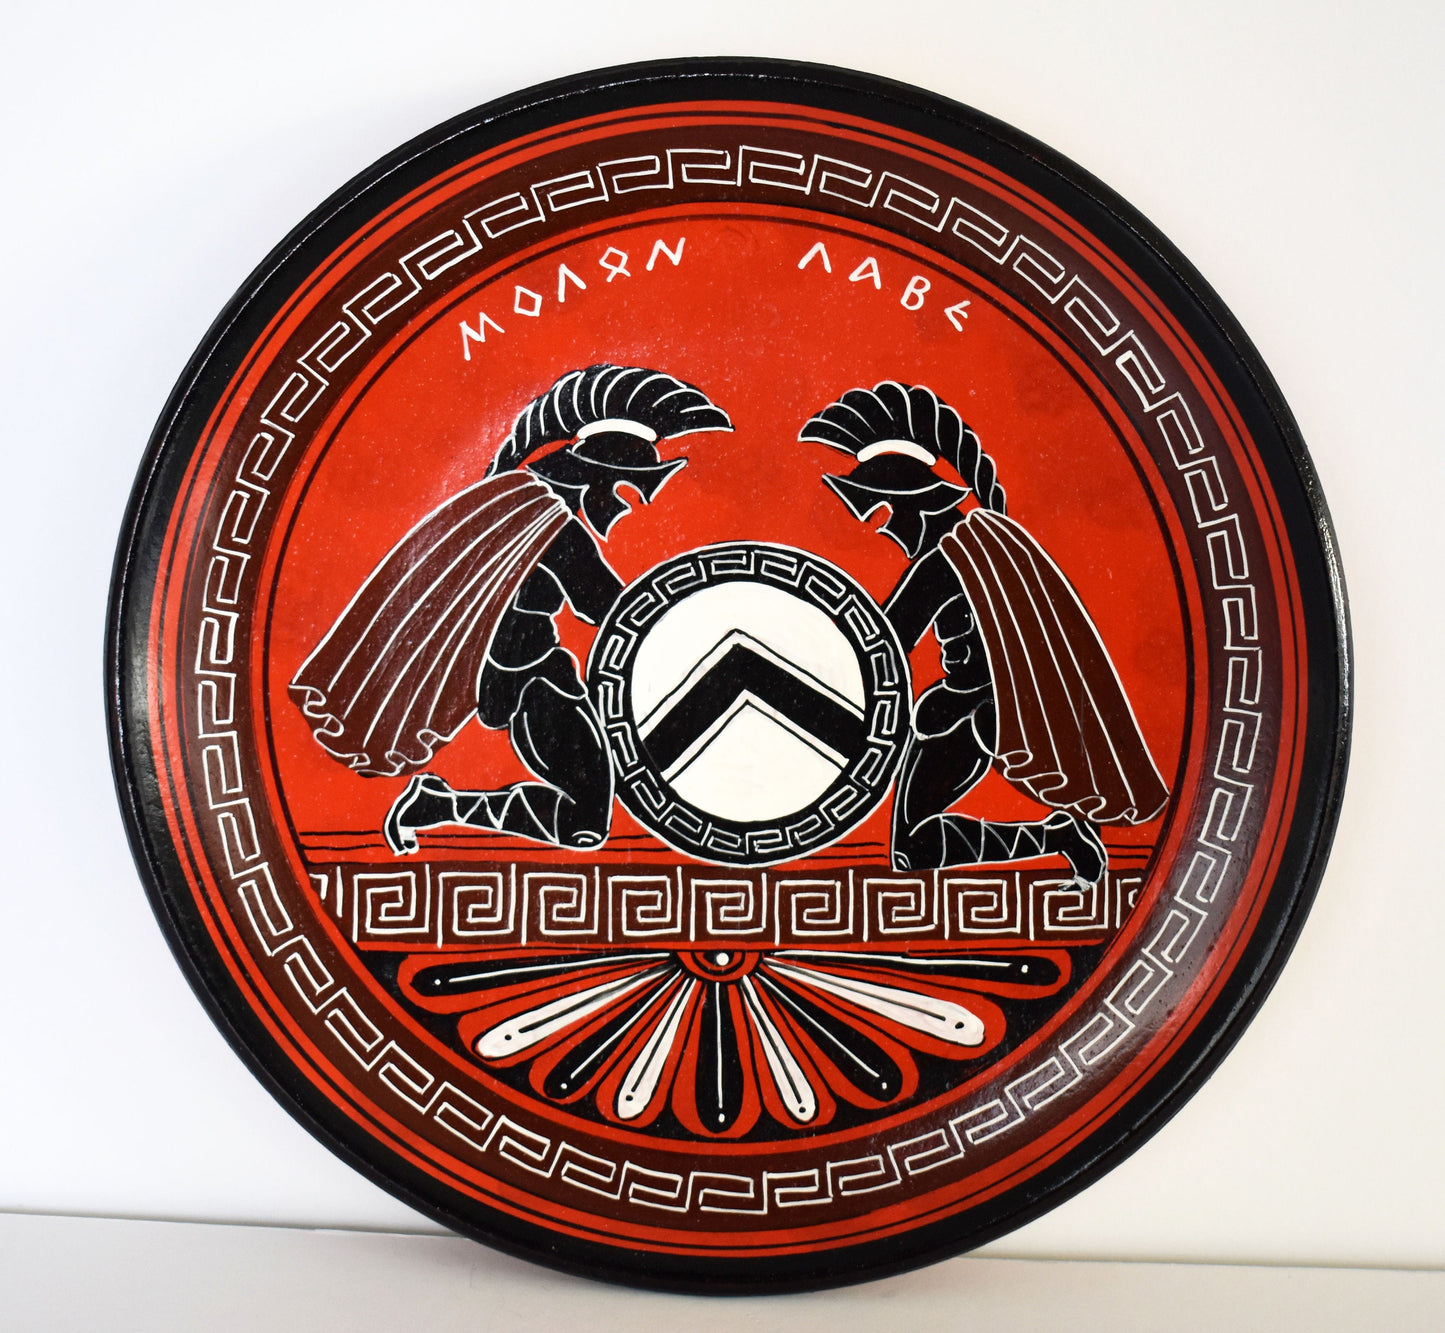 Spartan Warriors with Λ Symbol - 300 - Thermopylae - Μolon Labe, Come and get them - Ceramic plate - Handmade in Greece